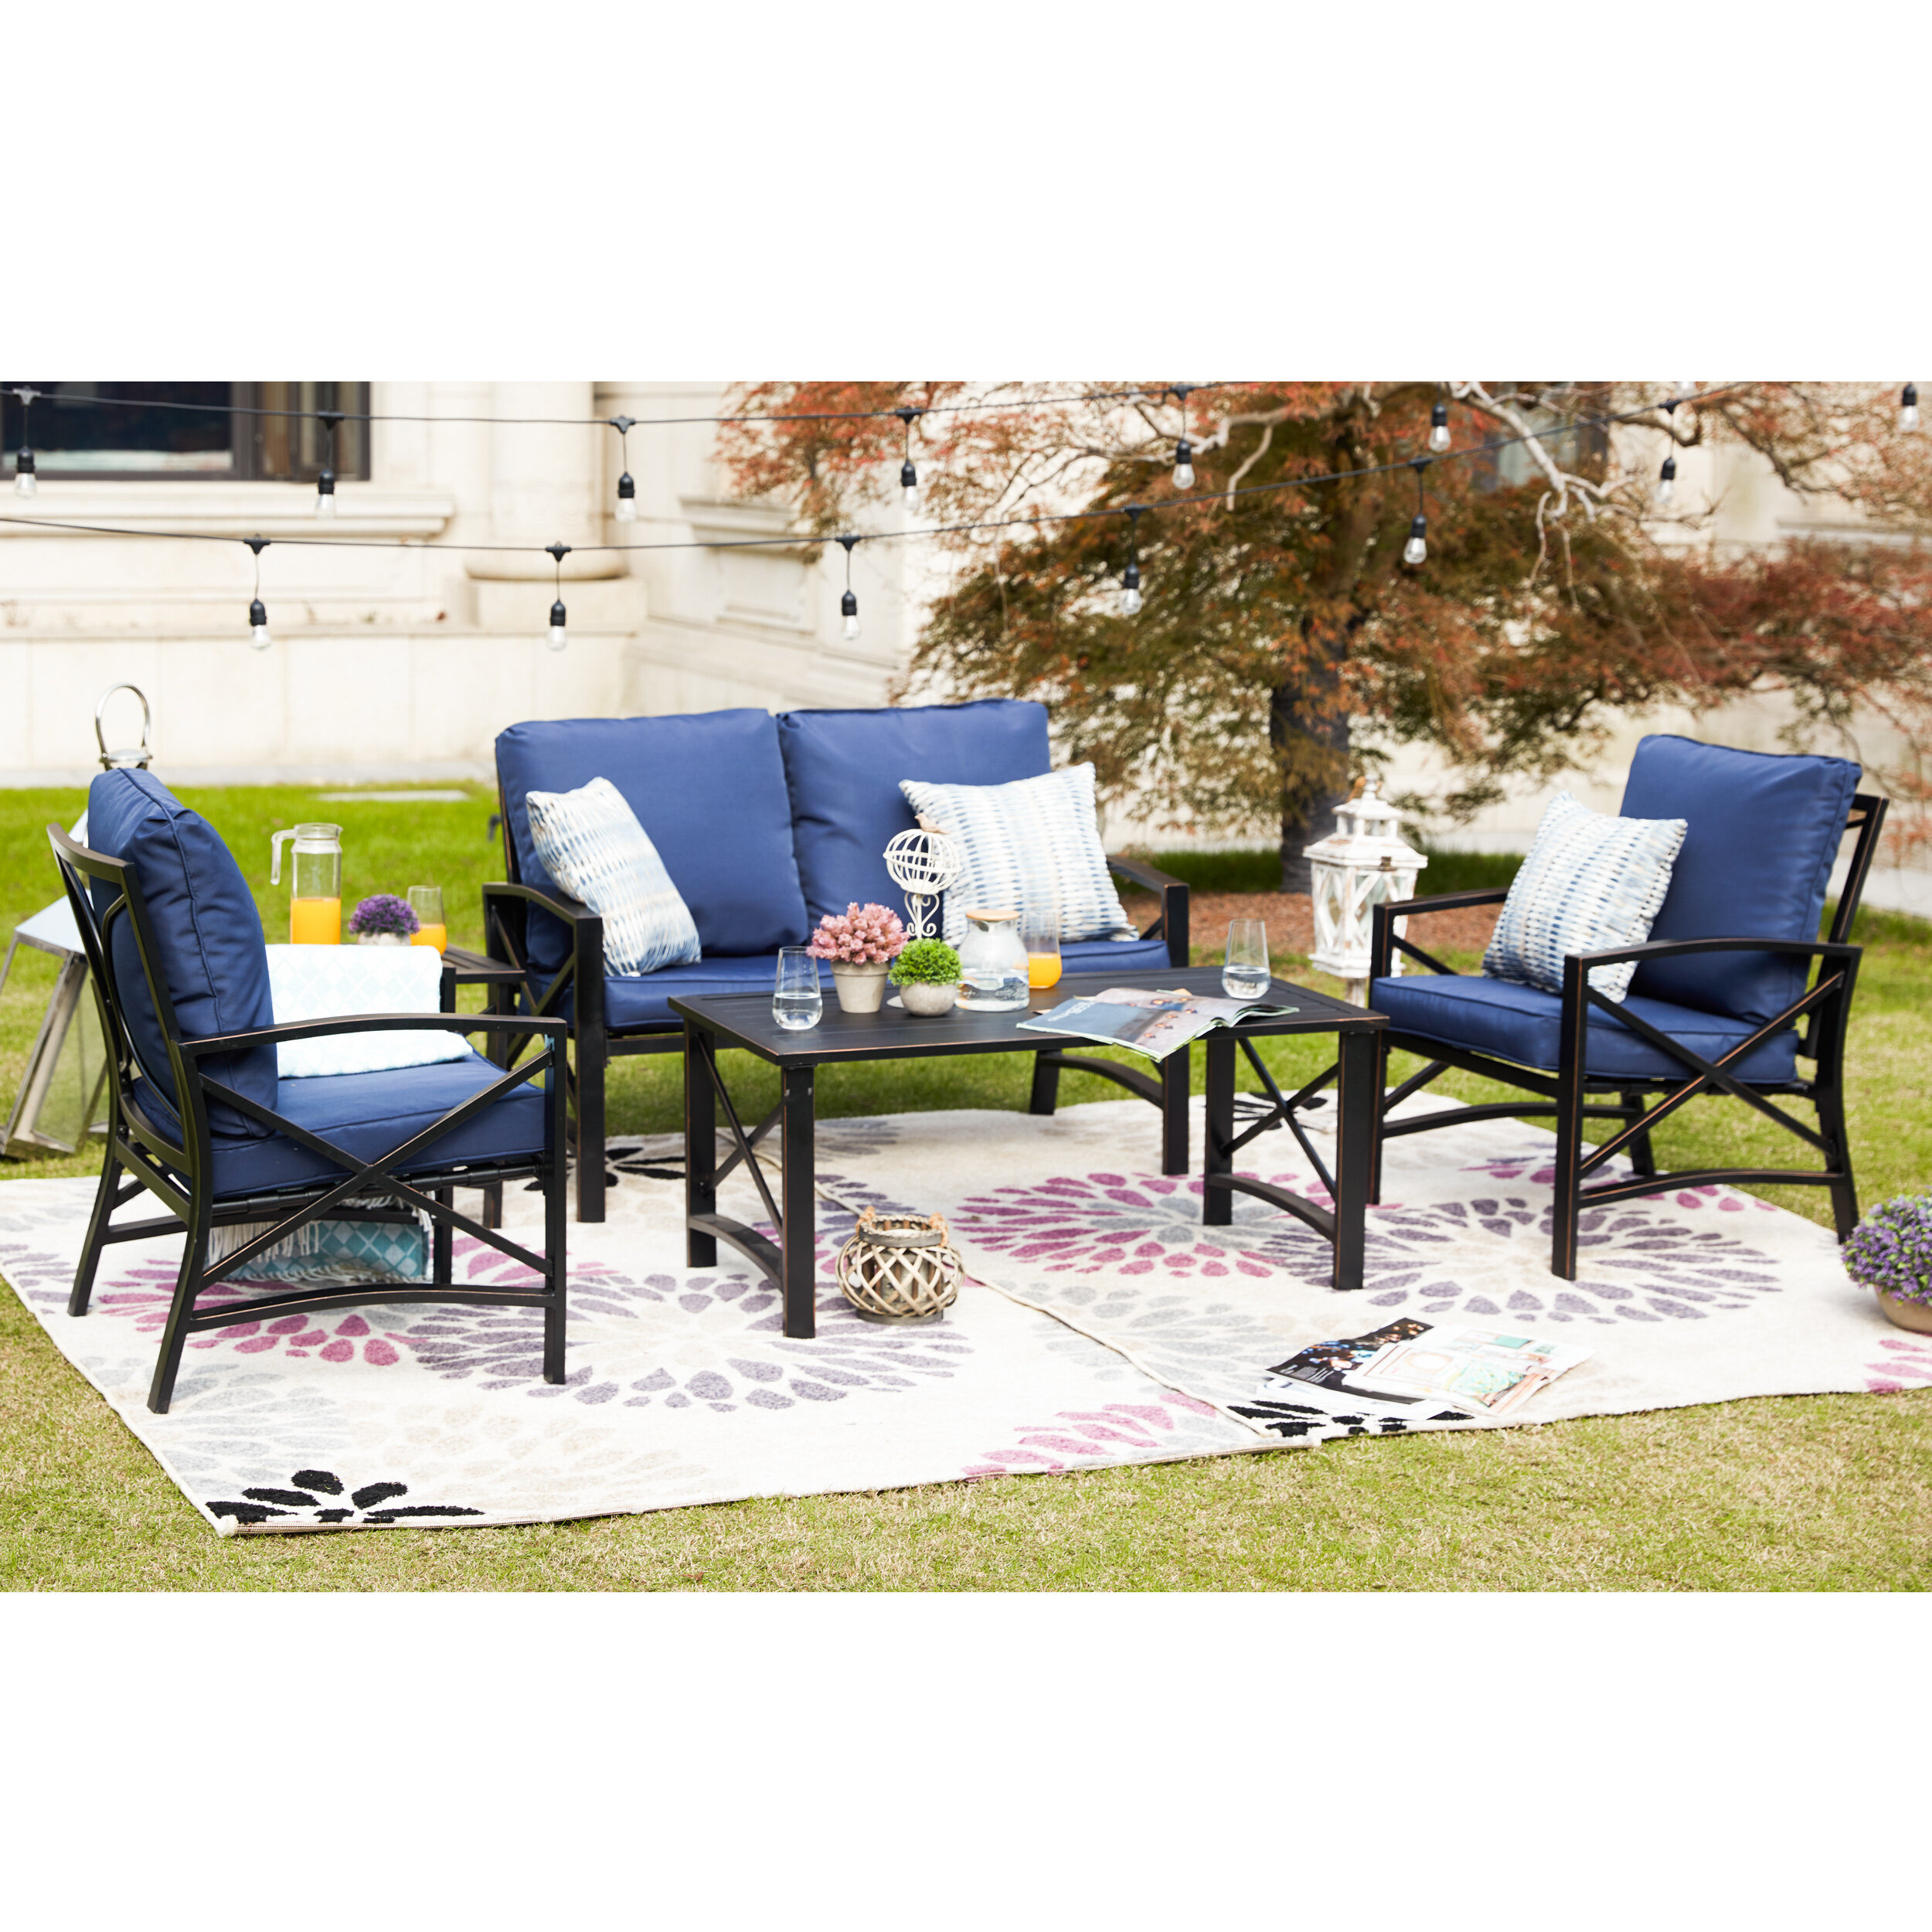 Charlton Home® Cushions & Reviews Person Group Outdoor Seating - Straughter with Wayfair 4 